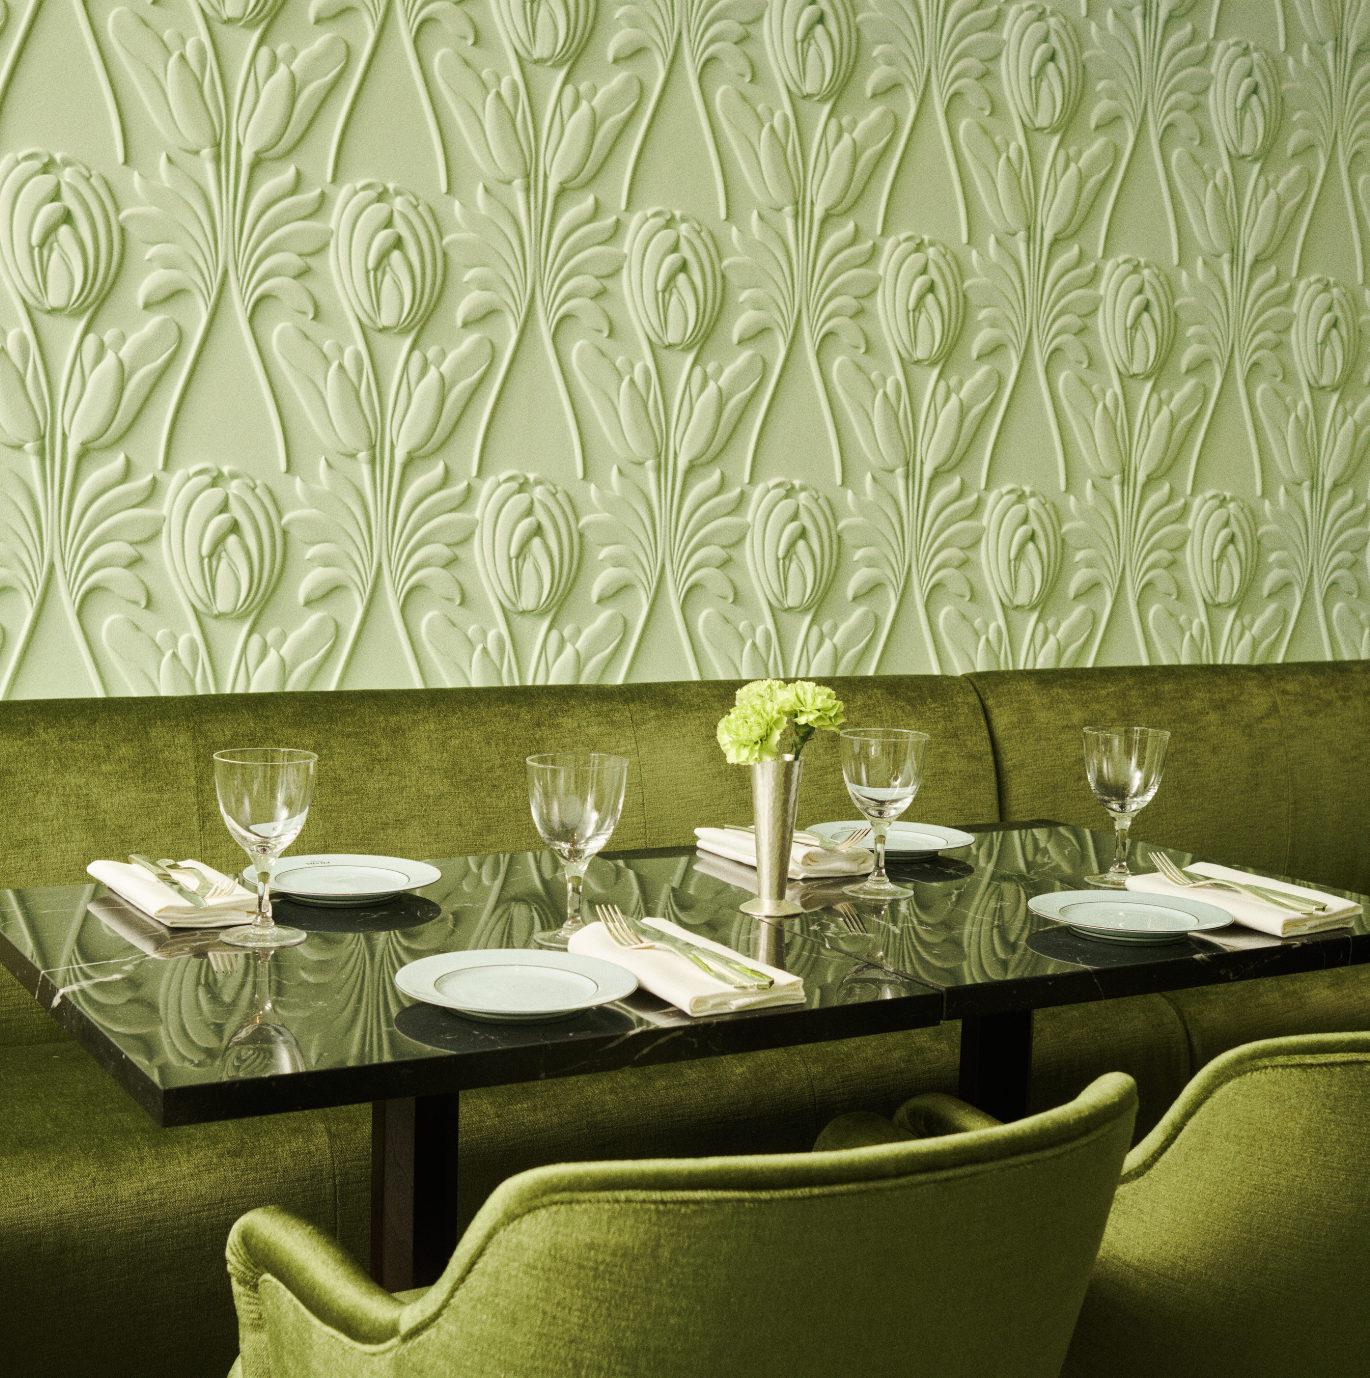 This week Prada opened a mint-green cafe at Harrods